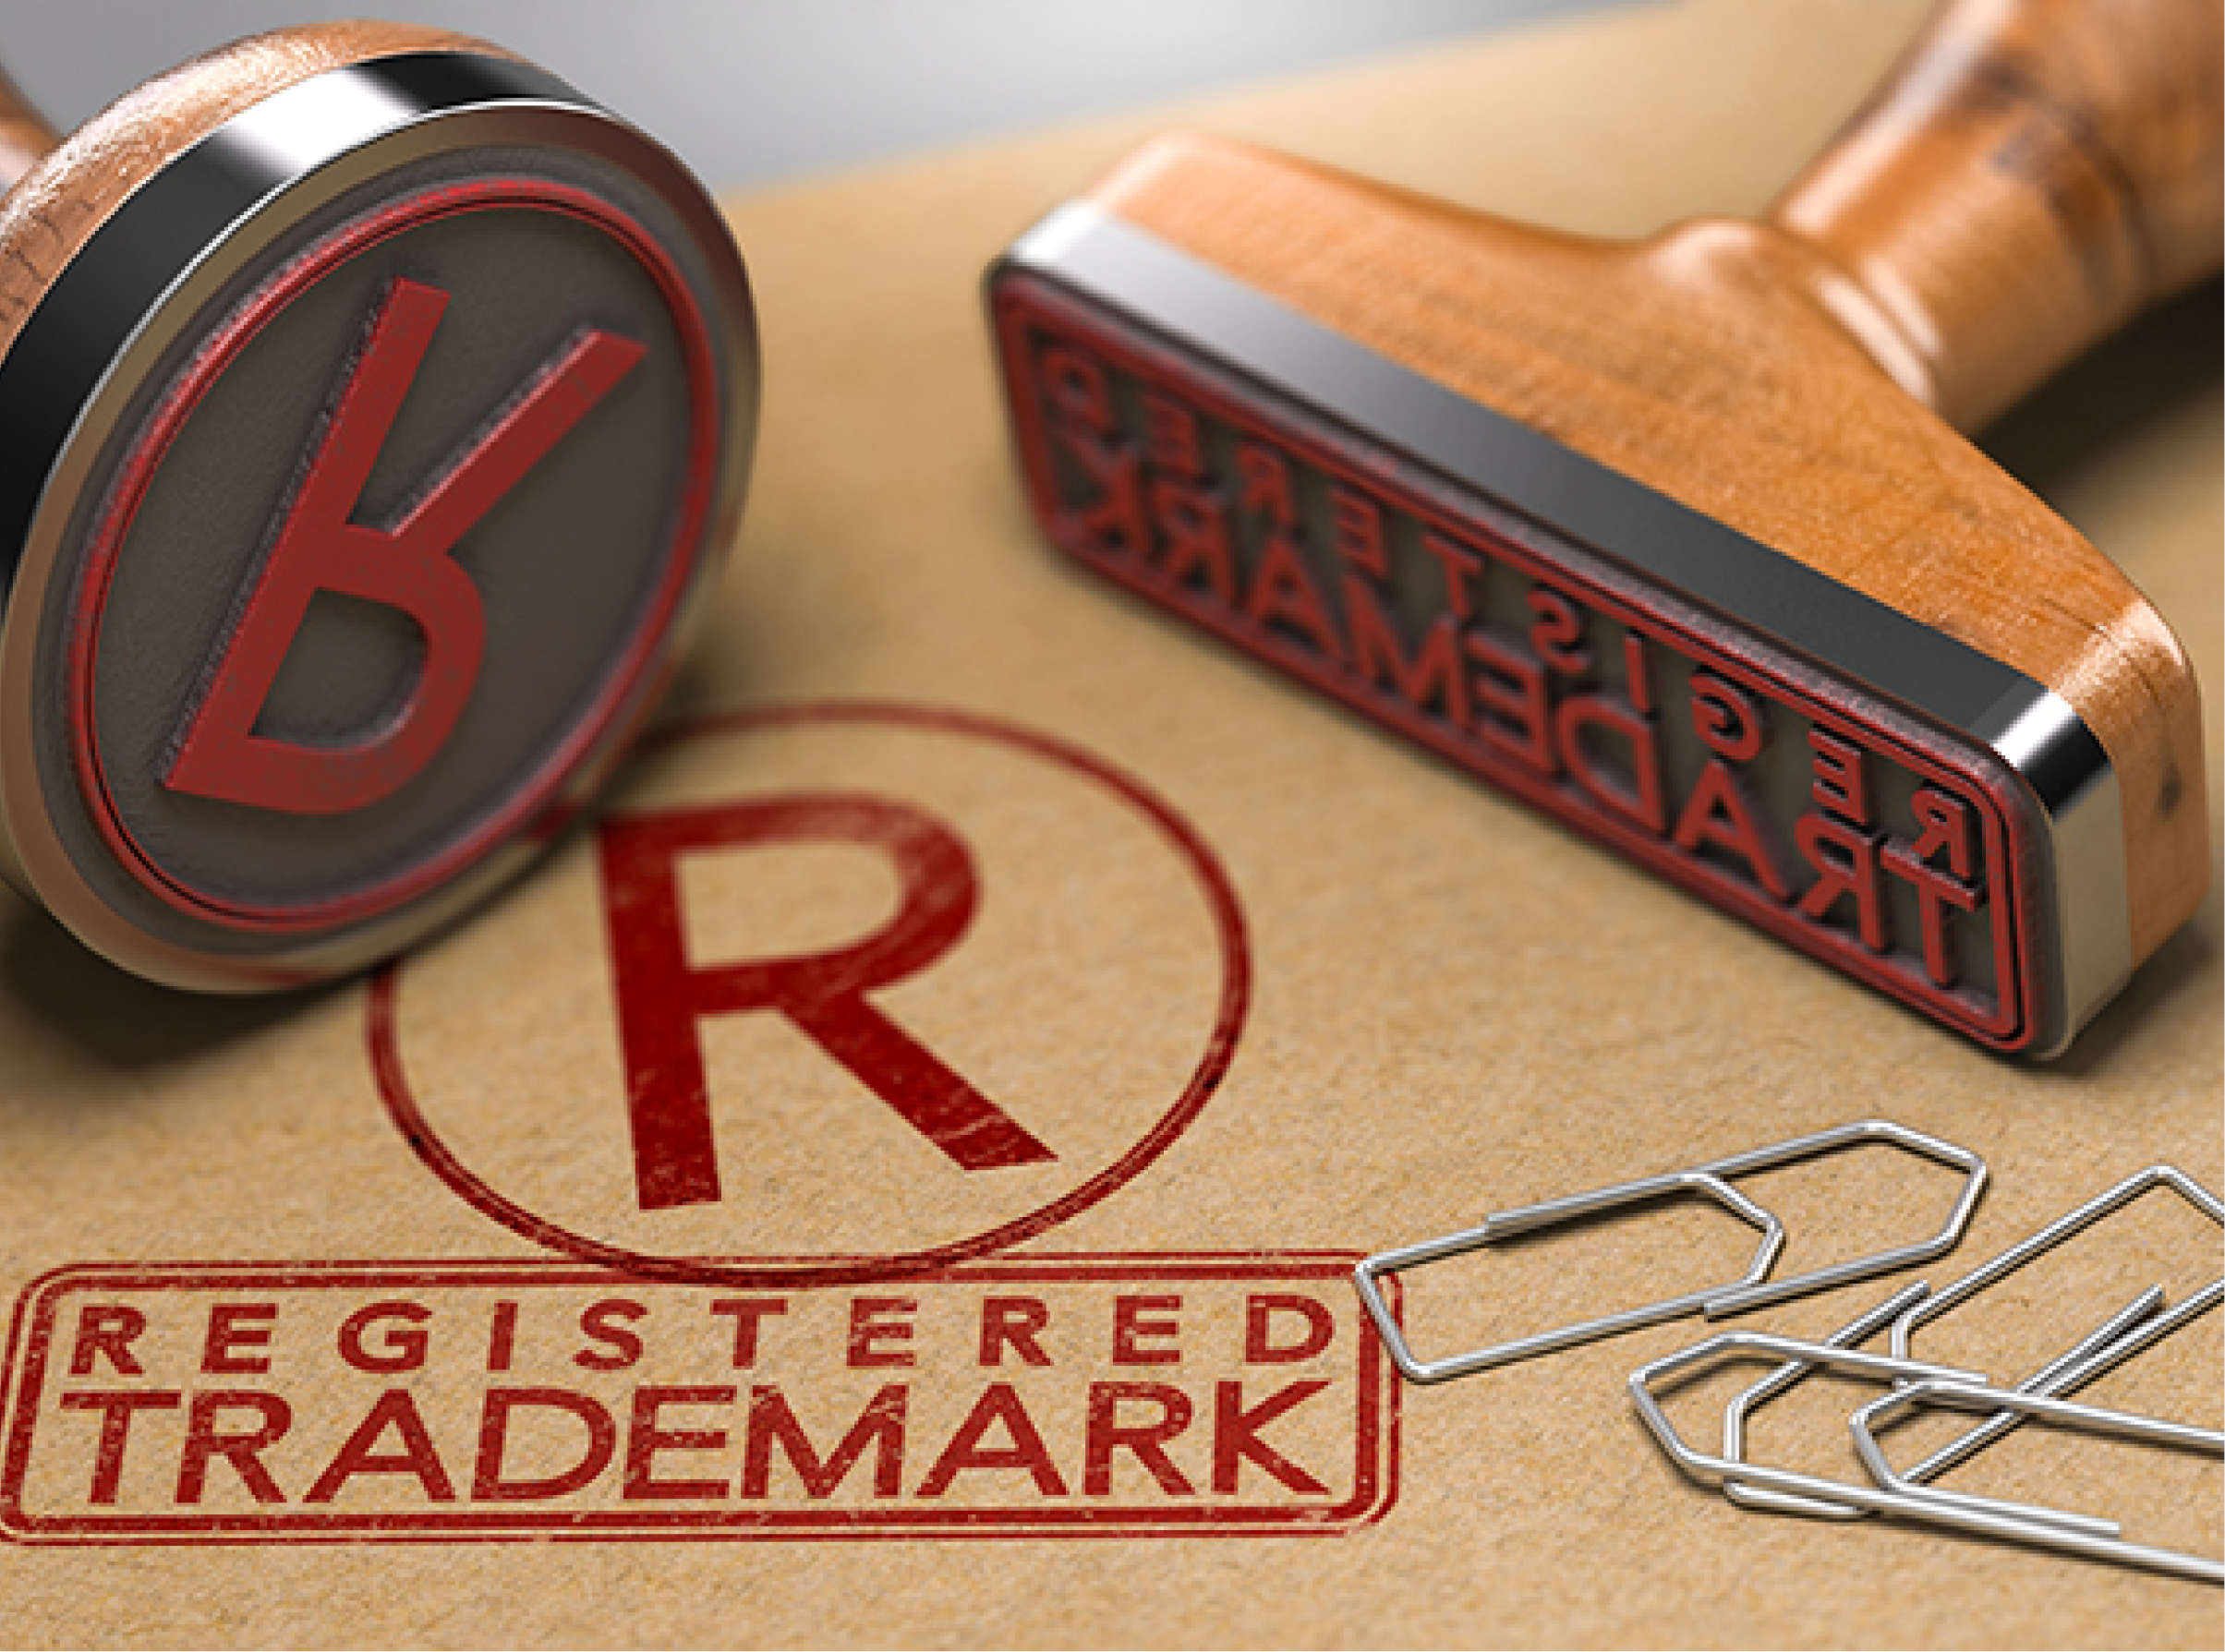 AN OVERVIEW OF TRADEMARK INFRINGEMENT IN INDIA